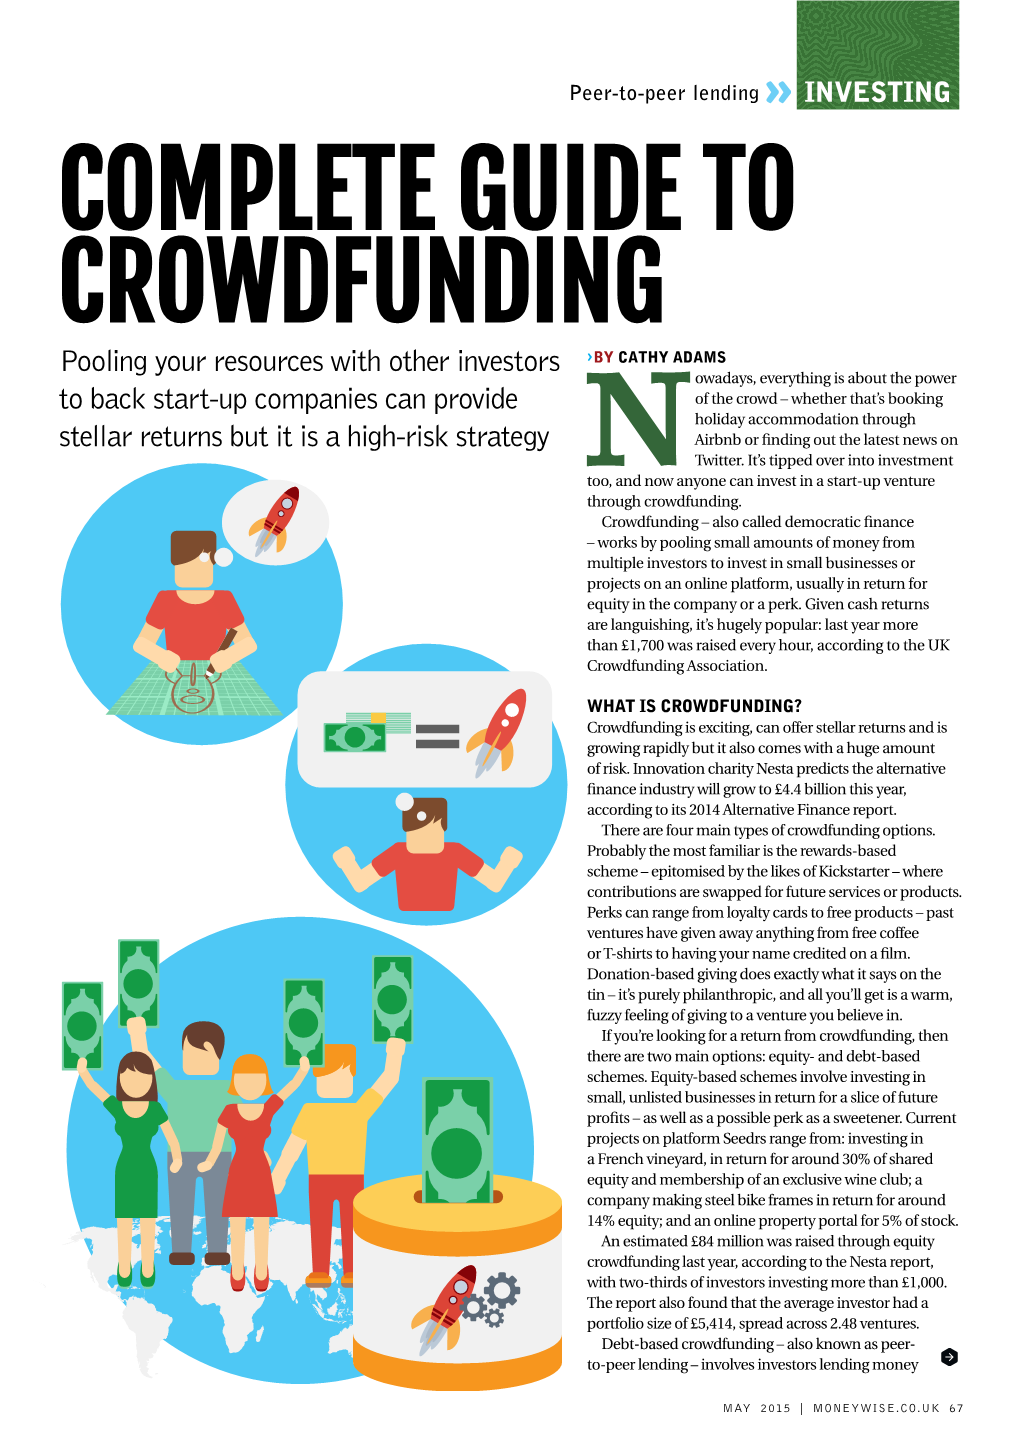 Complete Guide to Crowdfunding